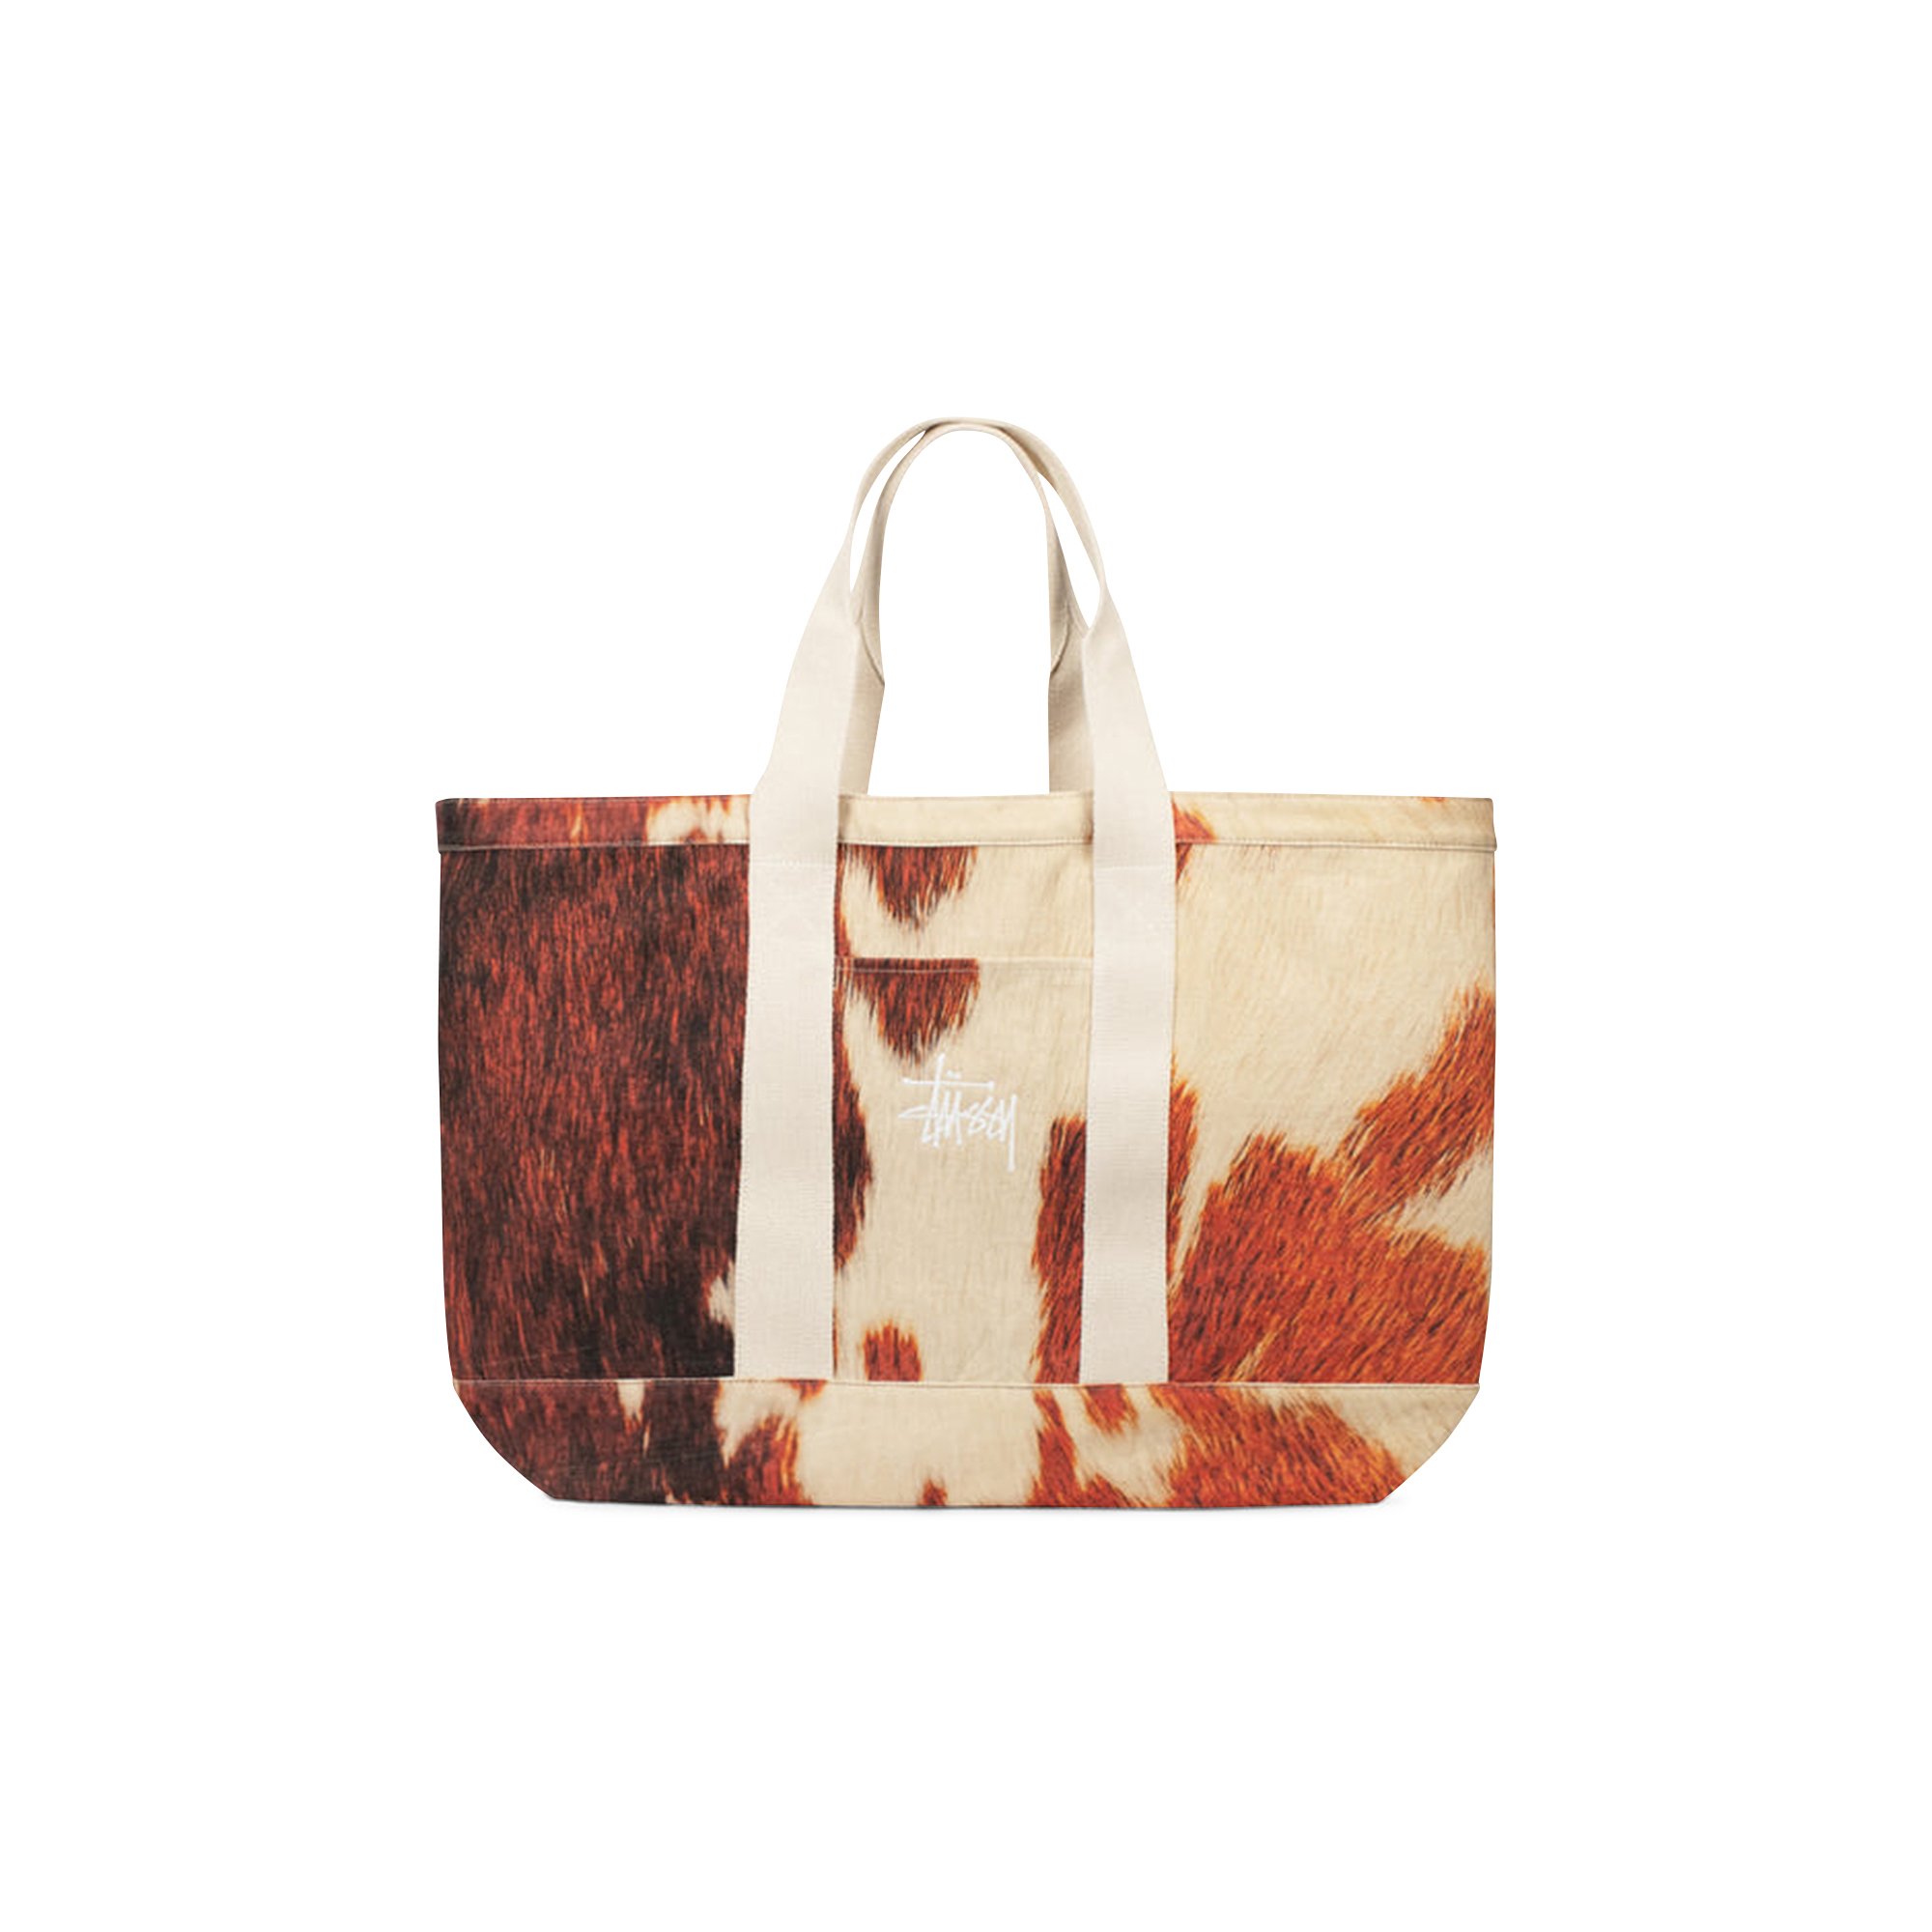 Buy Stussy Canvas Extra Large Tote Bag 'Cowhide' - 134253 COWH